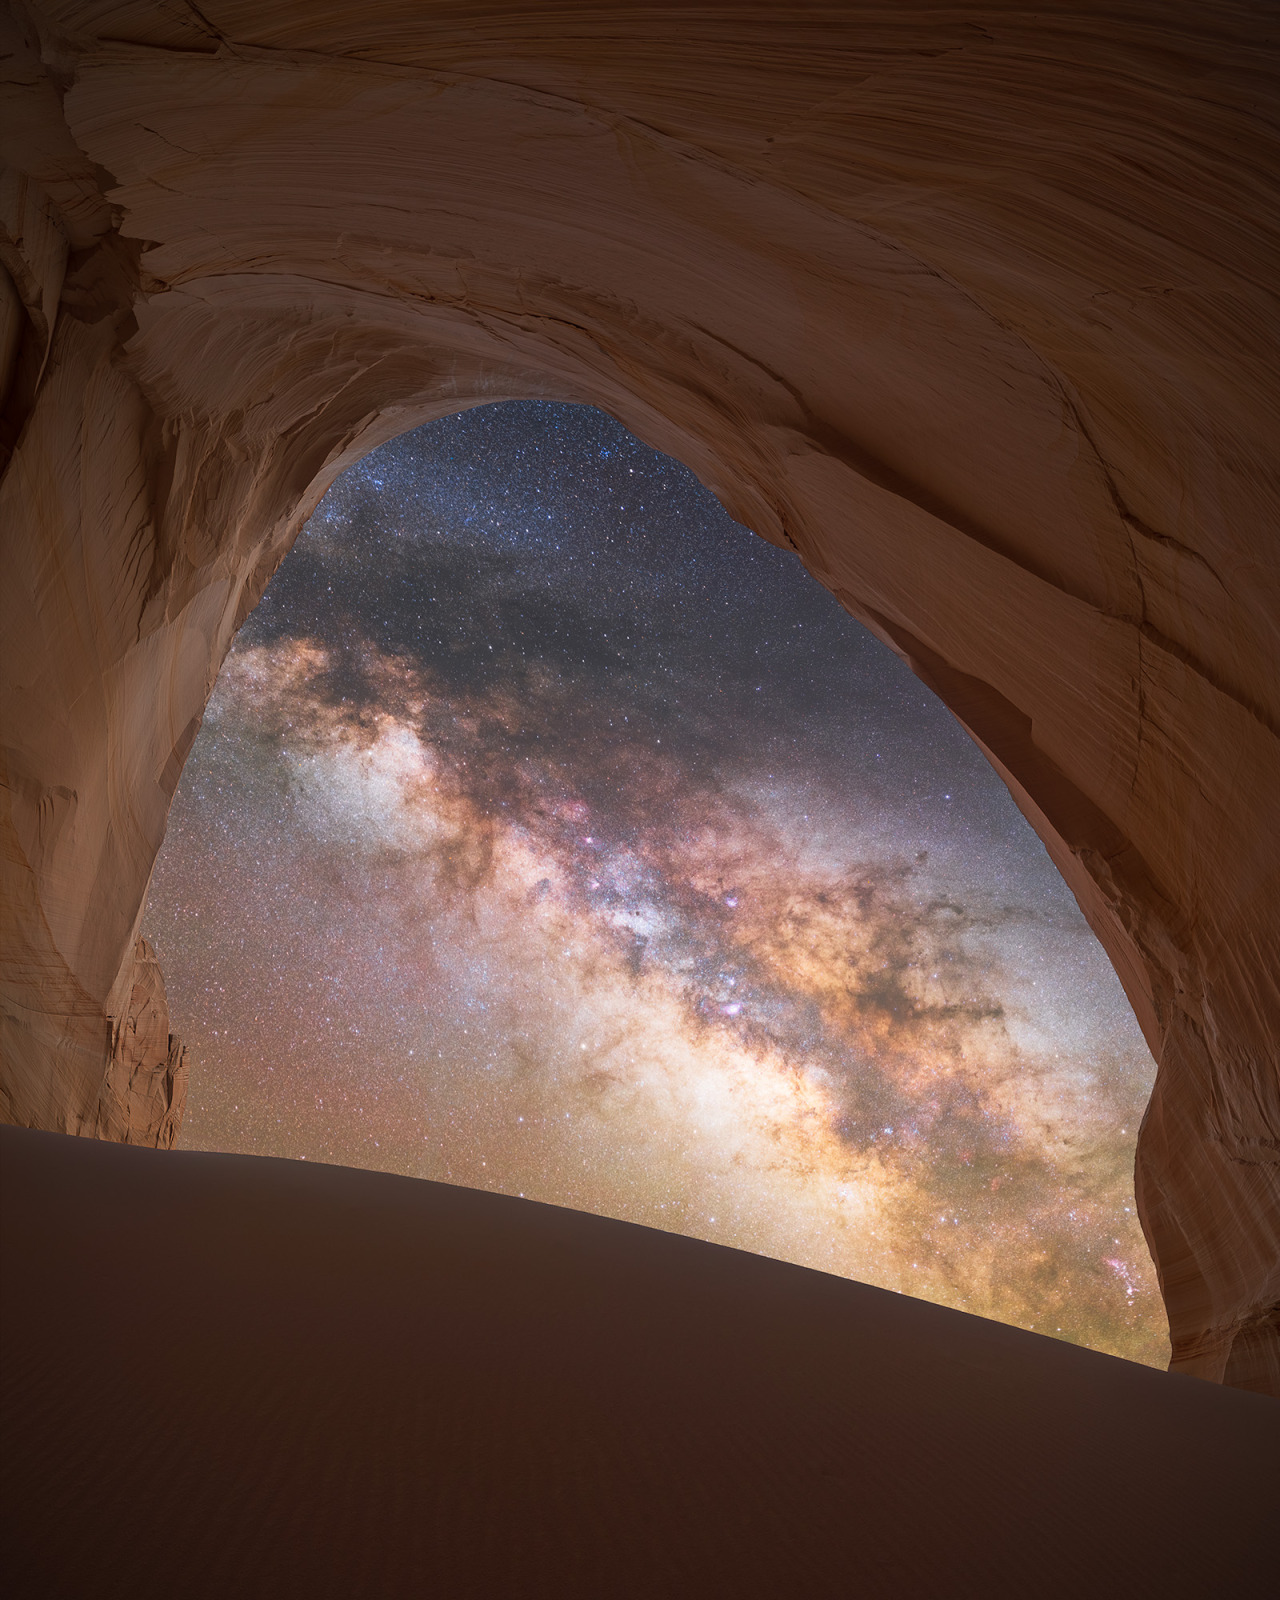 Milky Way seen from a massive sandstone alcove in a remote part of Utah [OC] [1600x2000] #EarthPorn#PicsBae#Fashion#Art#Landscape#Illustration#Vintage#Design#Beauty#Elegant#Perfect